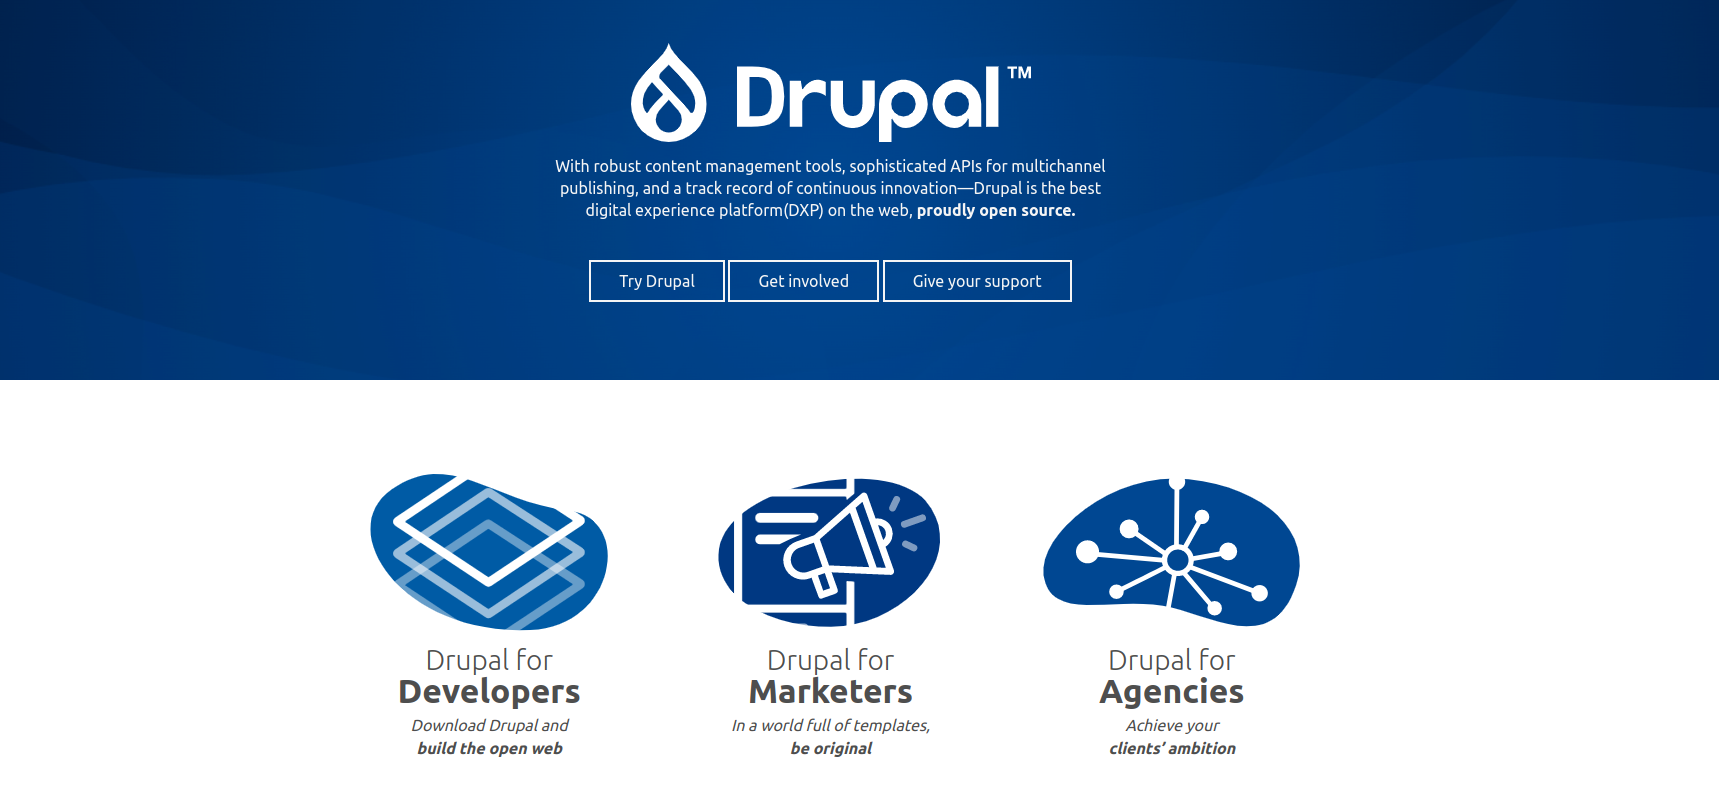 Introducing Drupal: The Flexible and Powerful Open-Source CMS